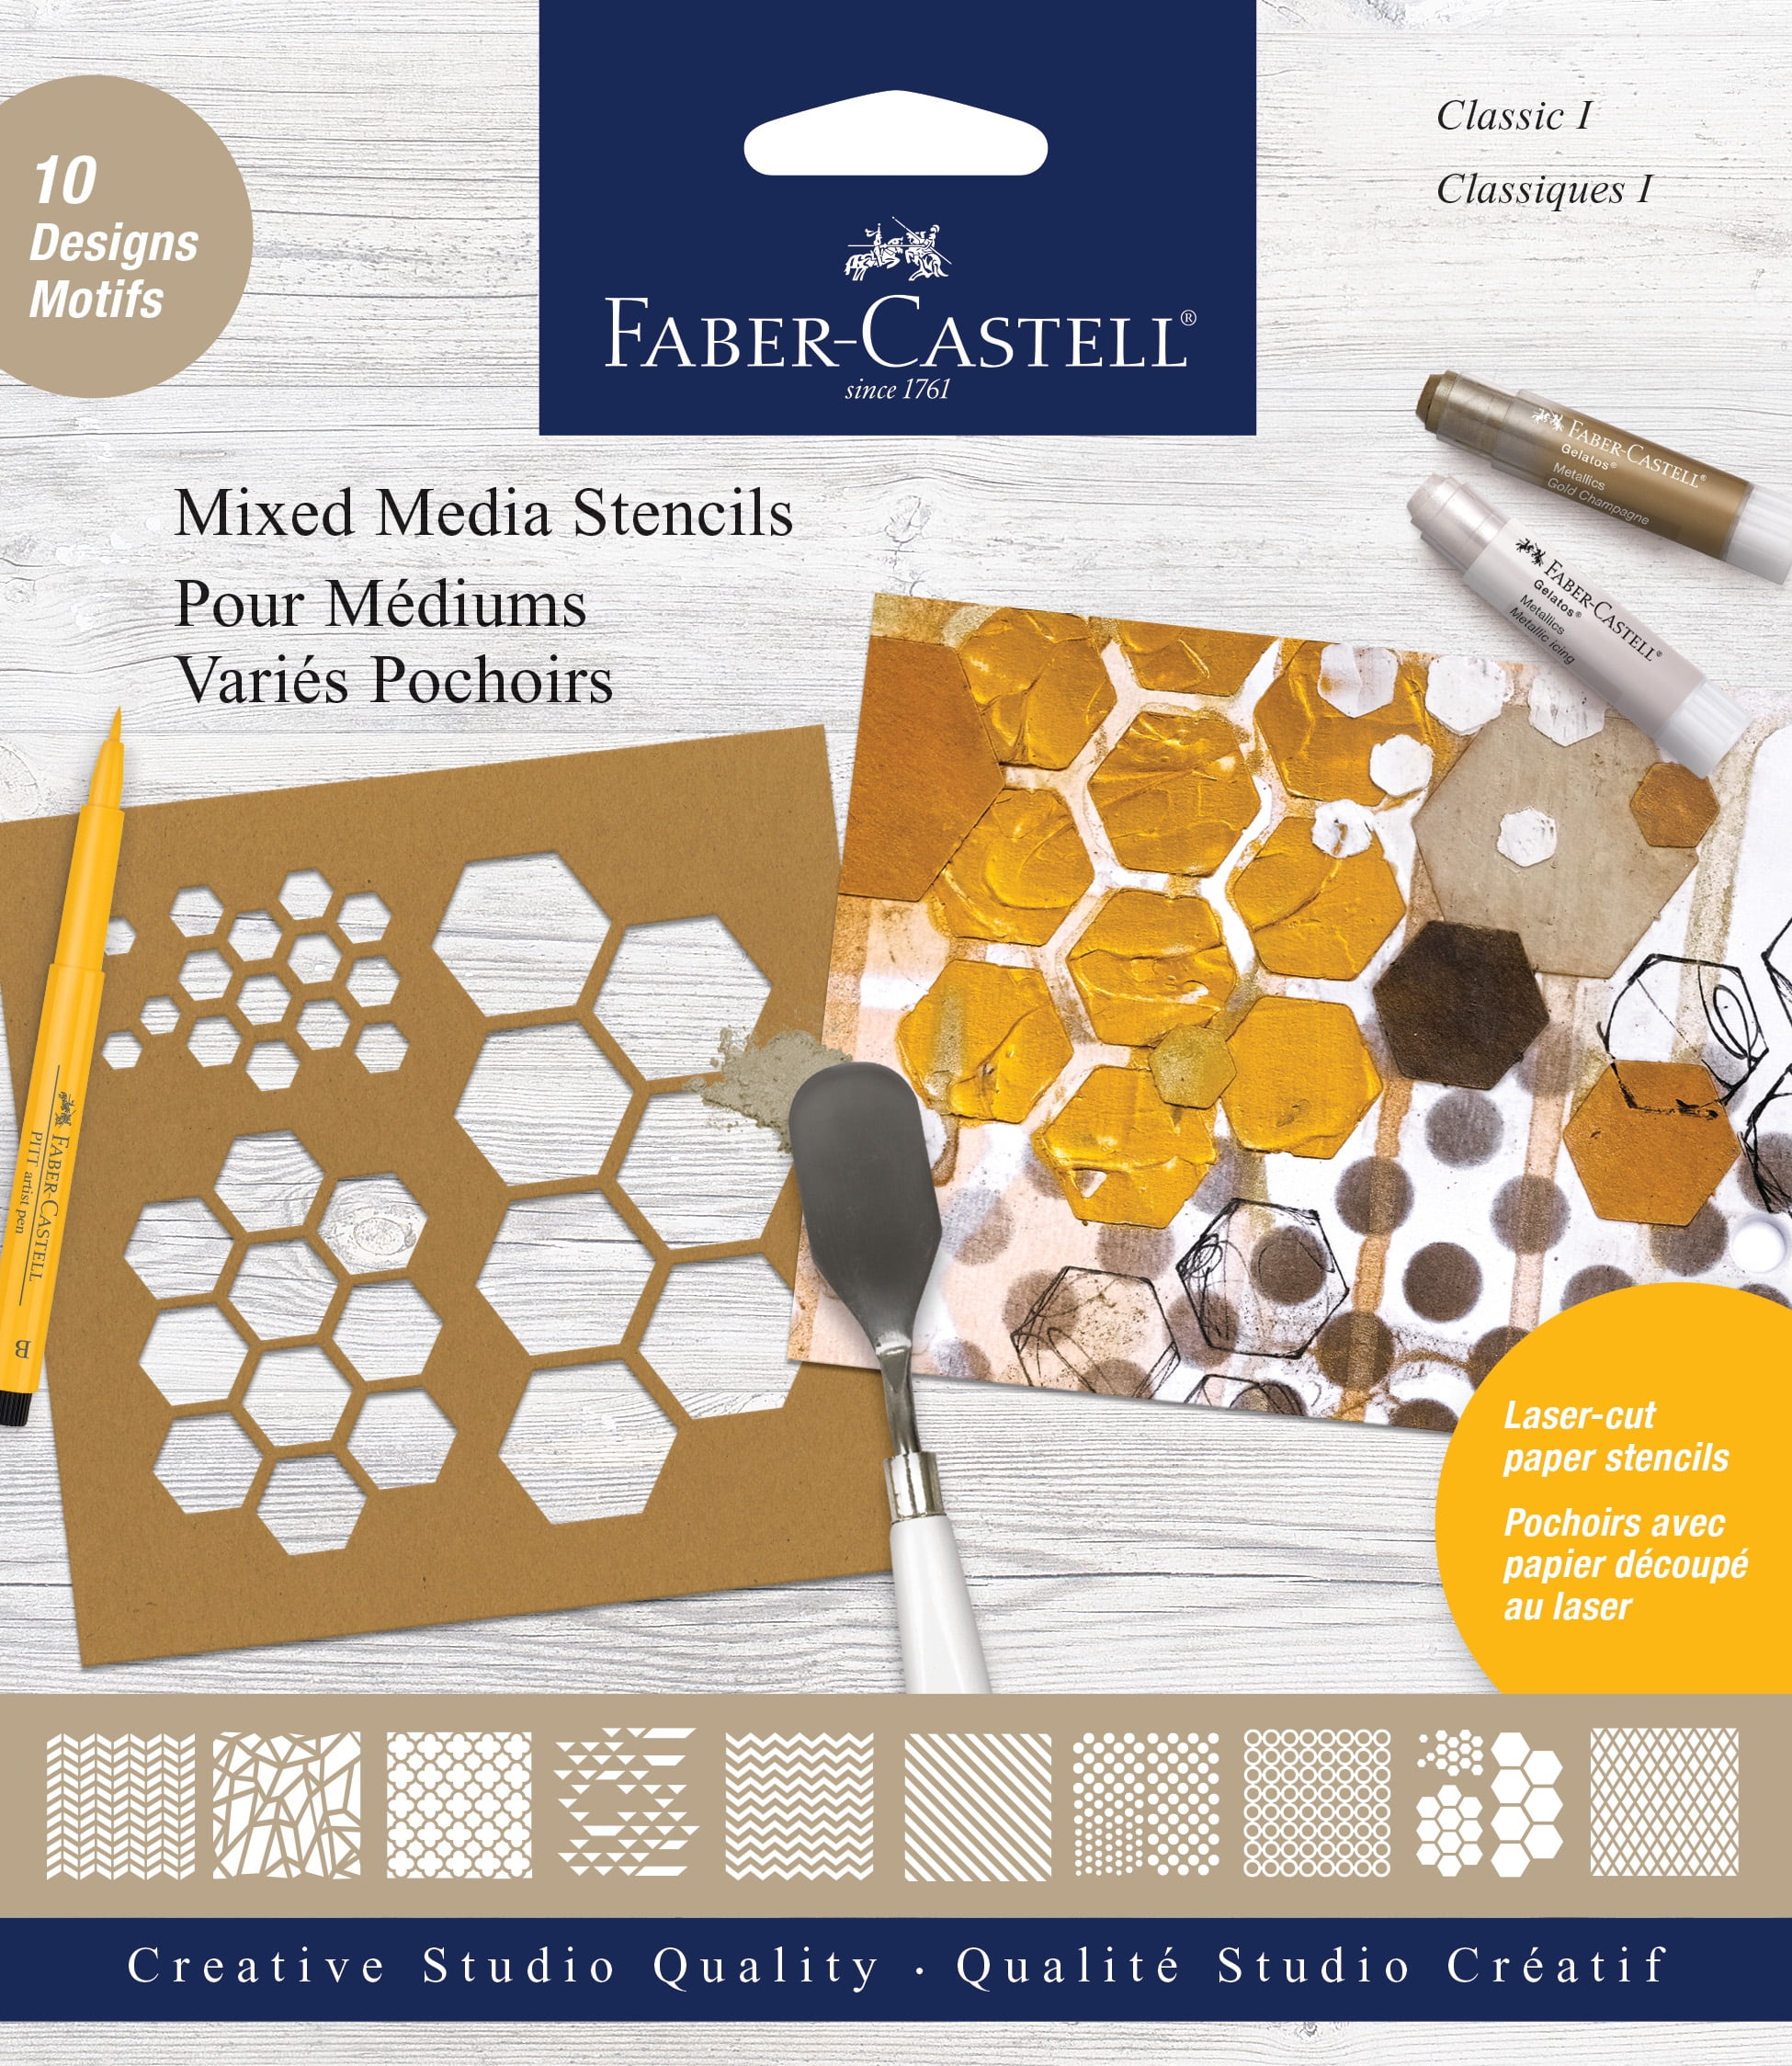 ArtSkills Leather Craft Kit - Leather Working Set for Beginners 64 Pieces